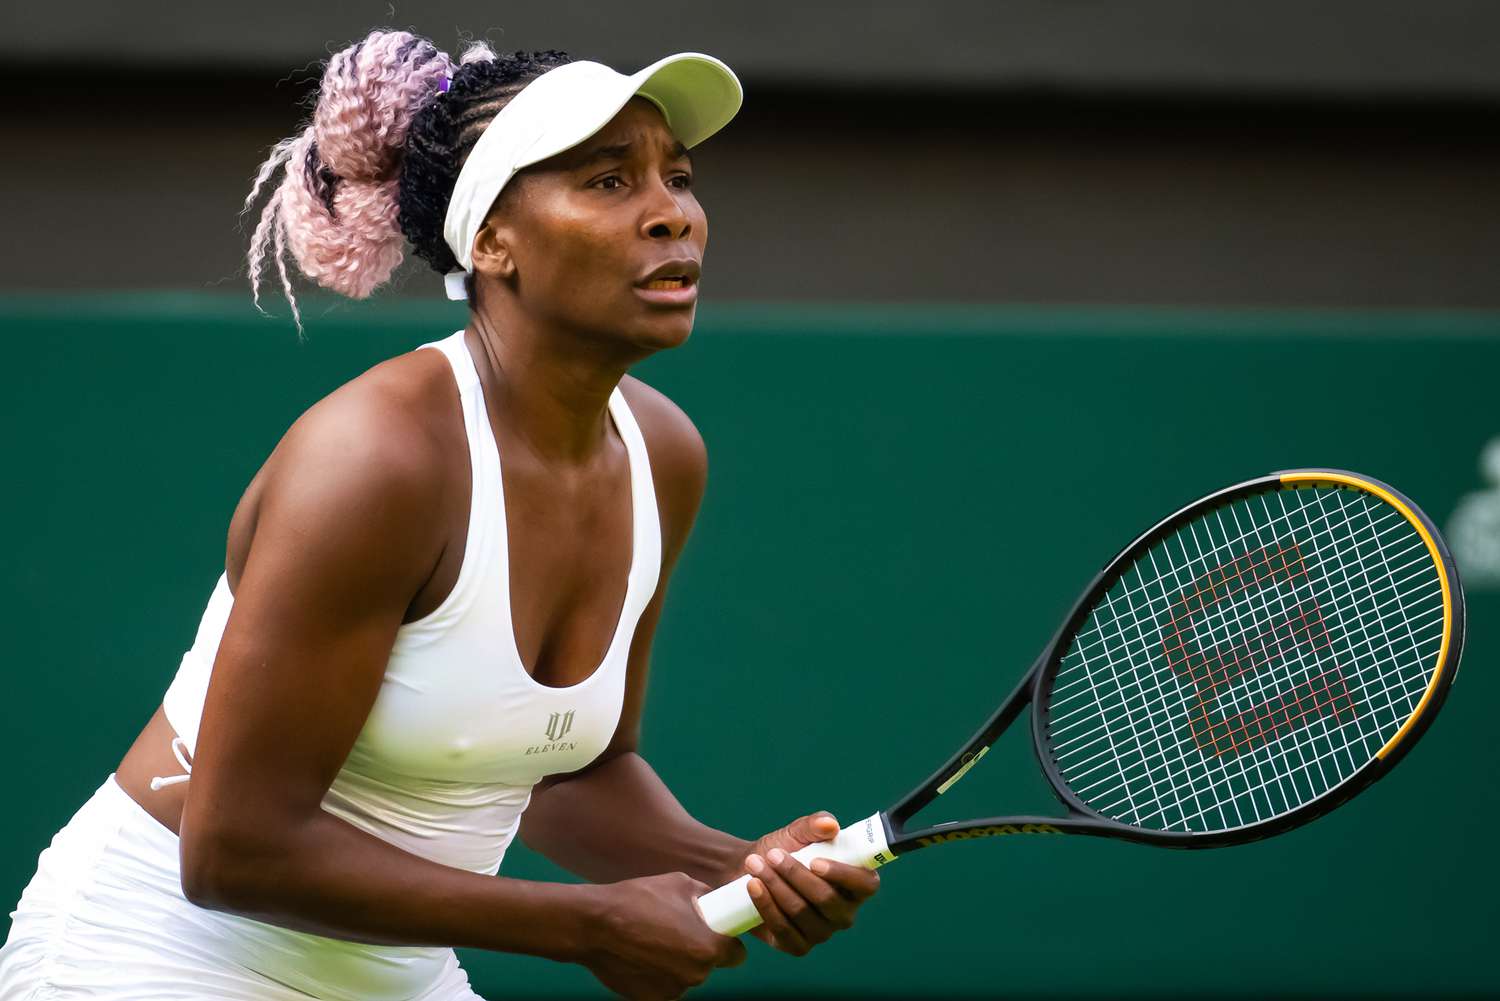 Venus Williams wearing a white sports outfit while holding a tennis racket